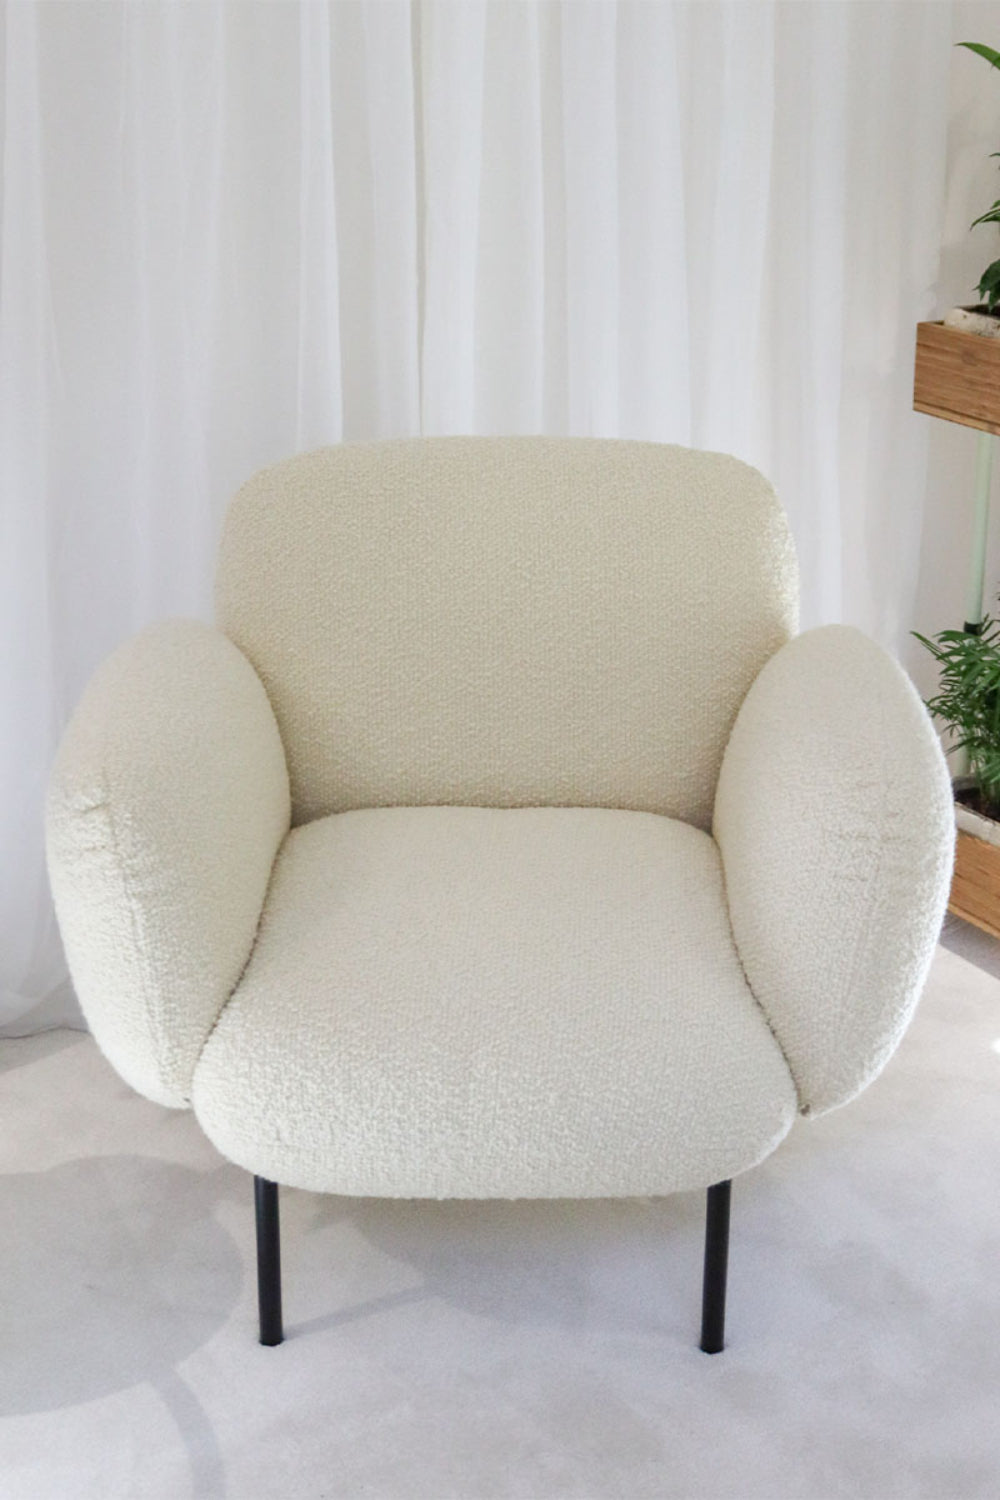 Boho Lounge Armchair In White Finish With Indoor Plant In Living Room Setting